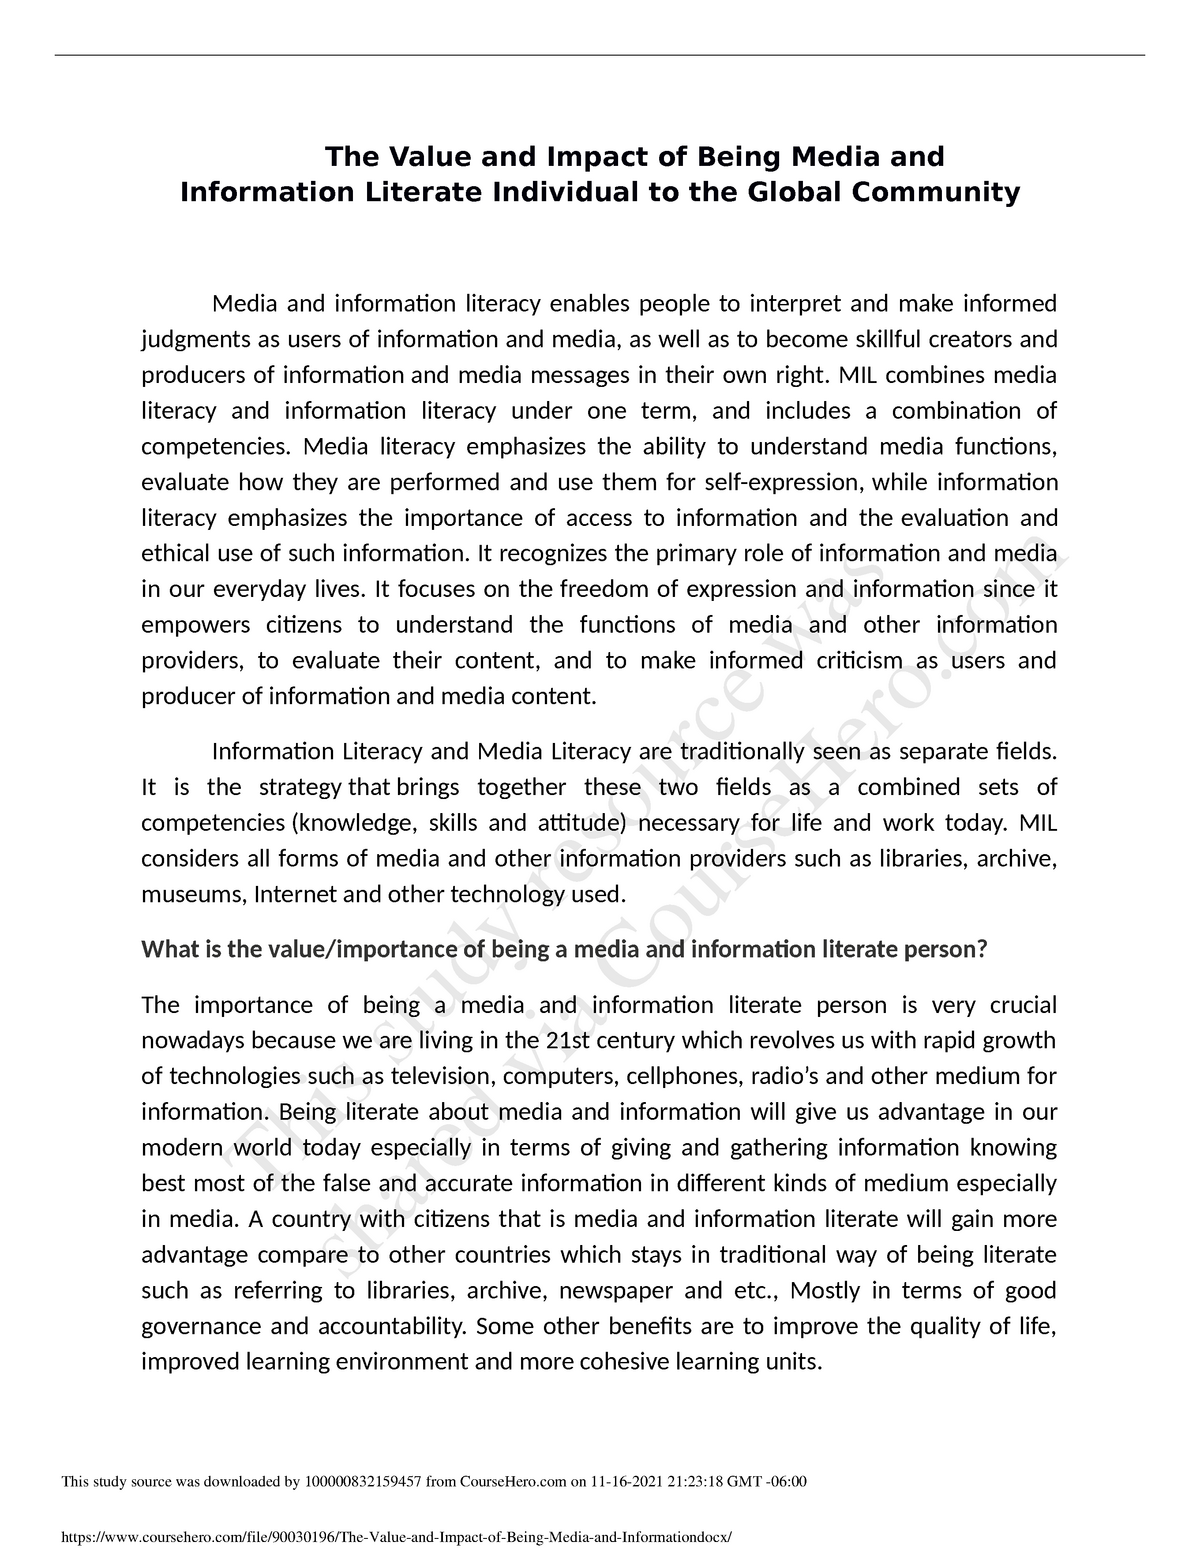 essay about value of being media and information literate